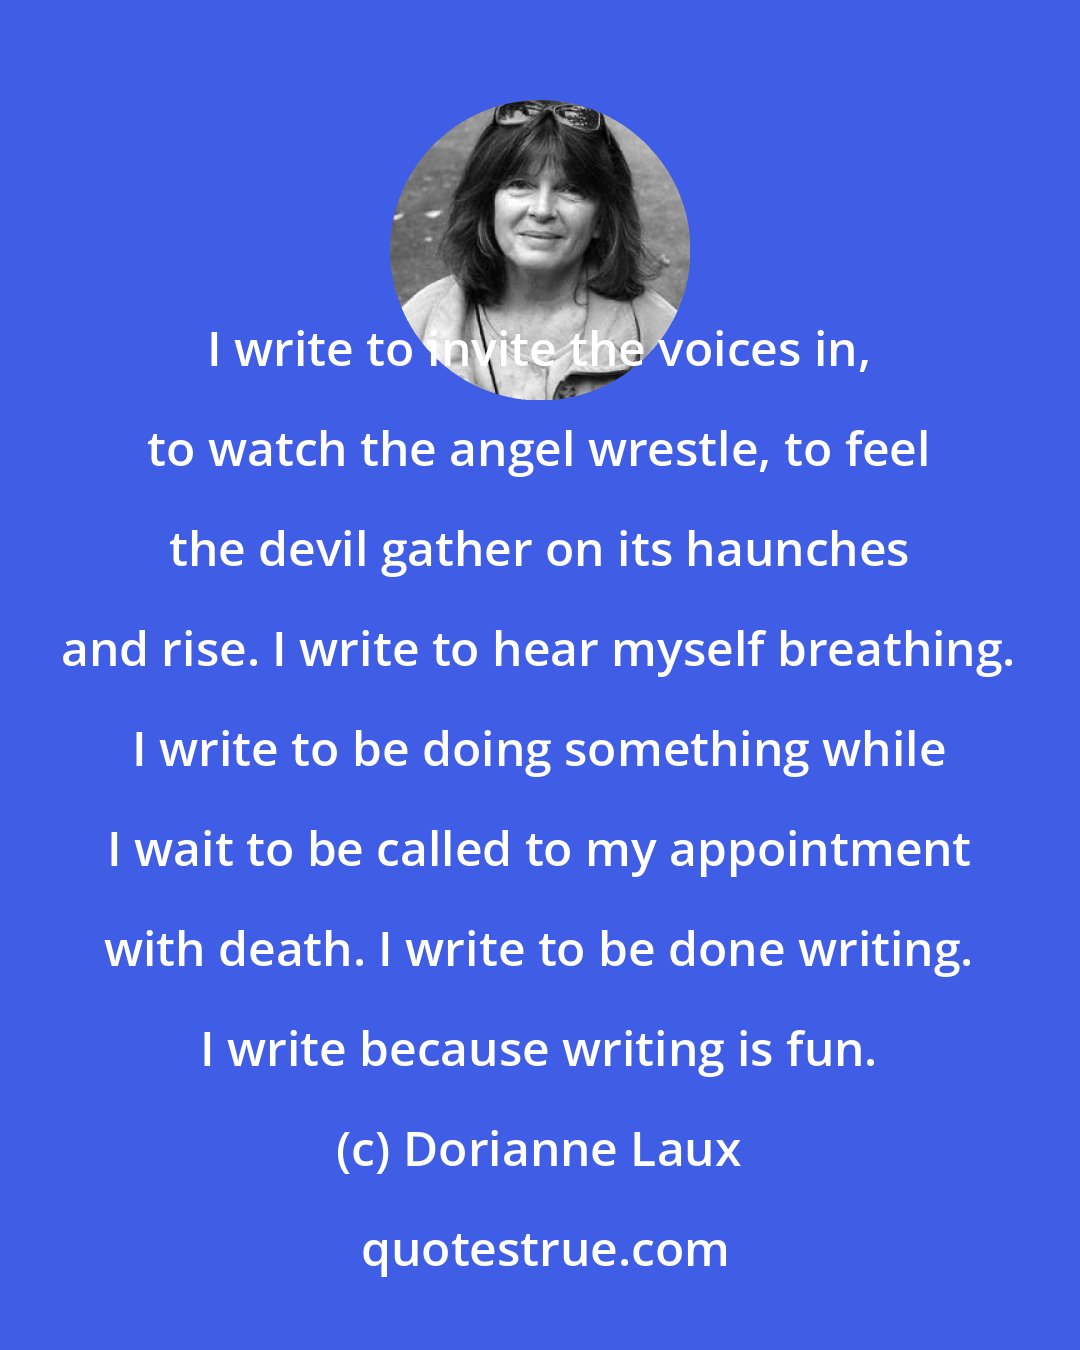 Dorianne Laux: I write to invite the voices in, to watch the angel wrestle, to feel the devil gather on its haunches and rise. I write to hear myself breathing. I write to be doing something while I wait to be called to my appointment with death. I write to be done writing. I write because writing is fun.